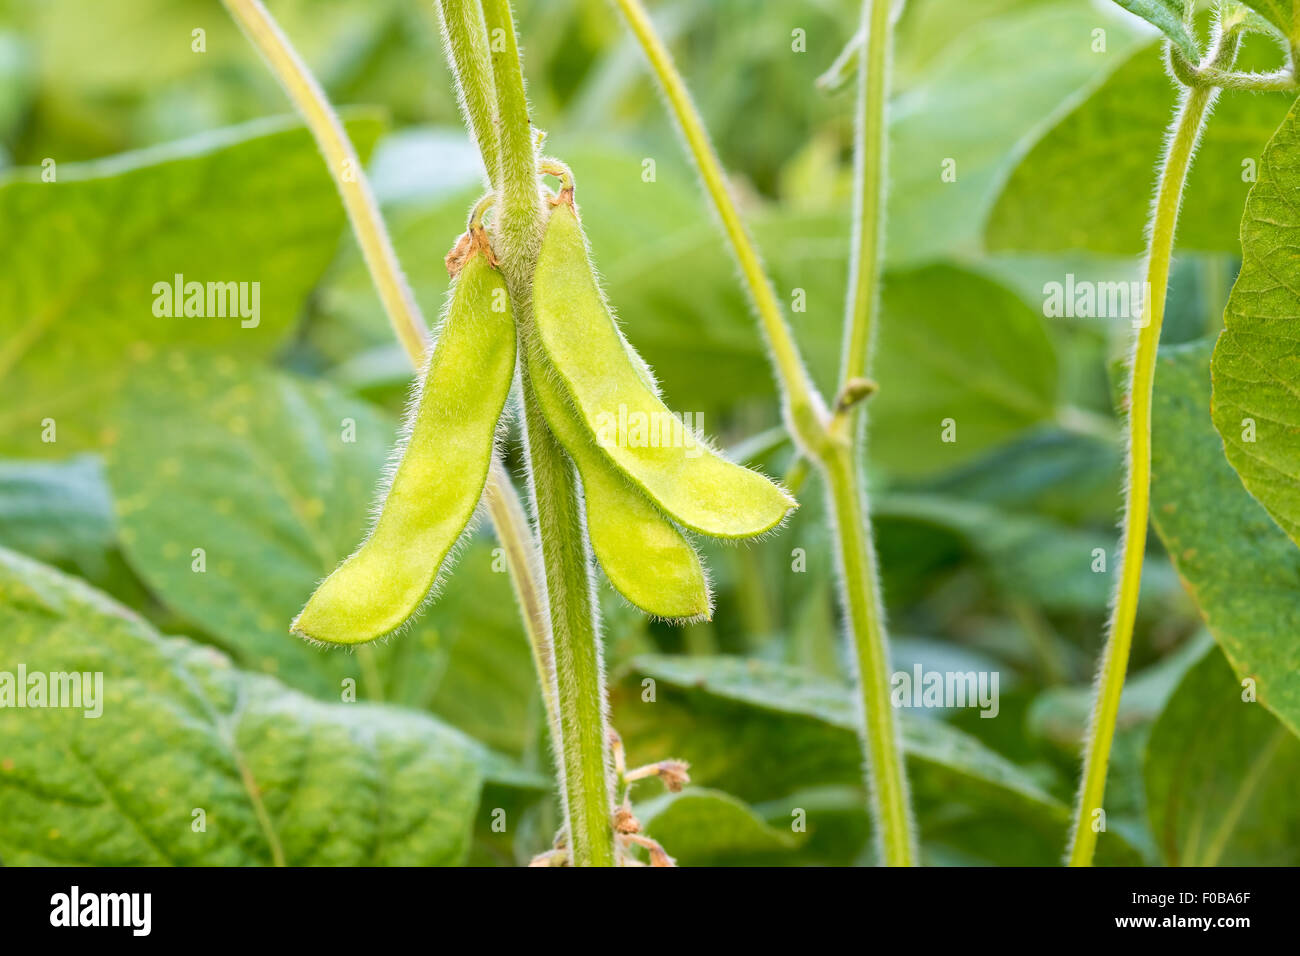 Young green soya bean in the backlit sunlight. Close-up. Stock Photo